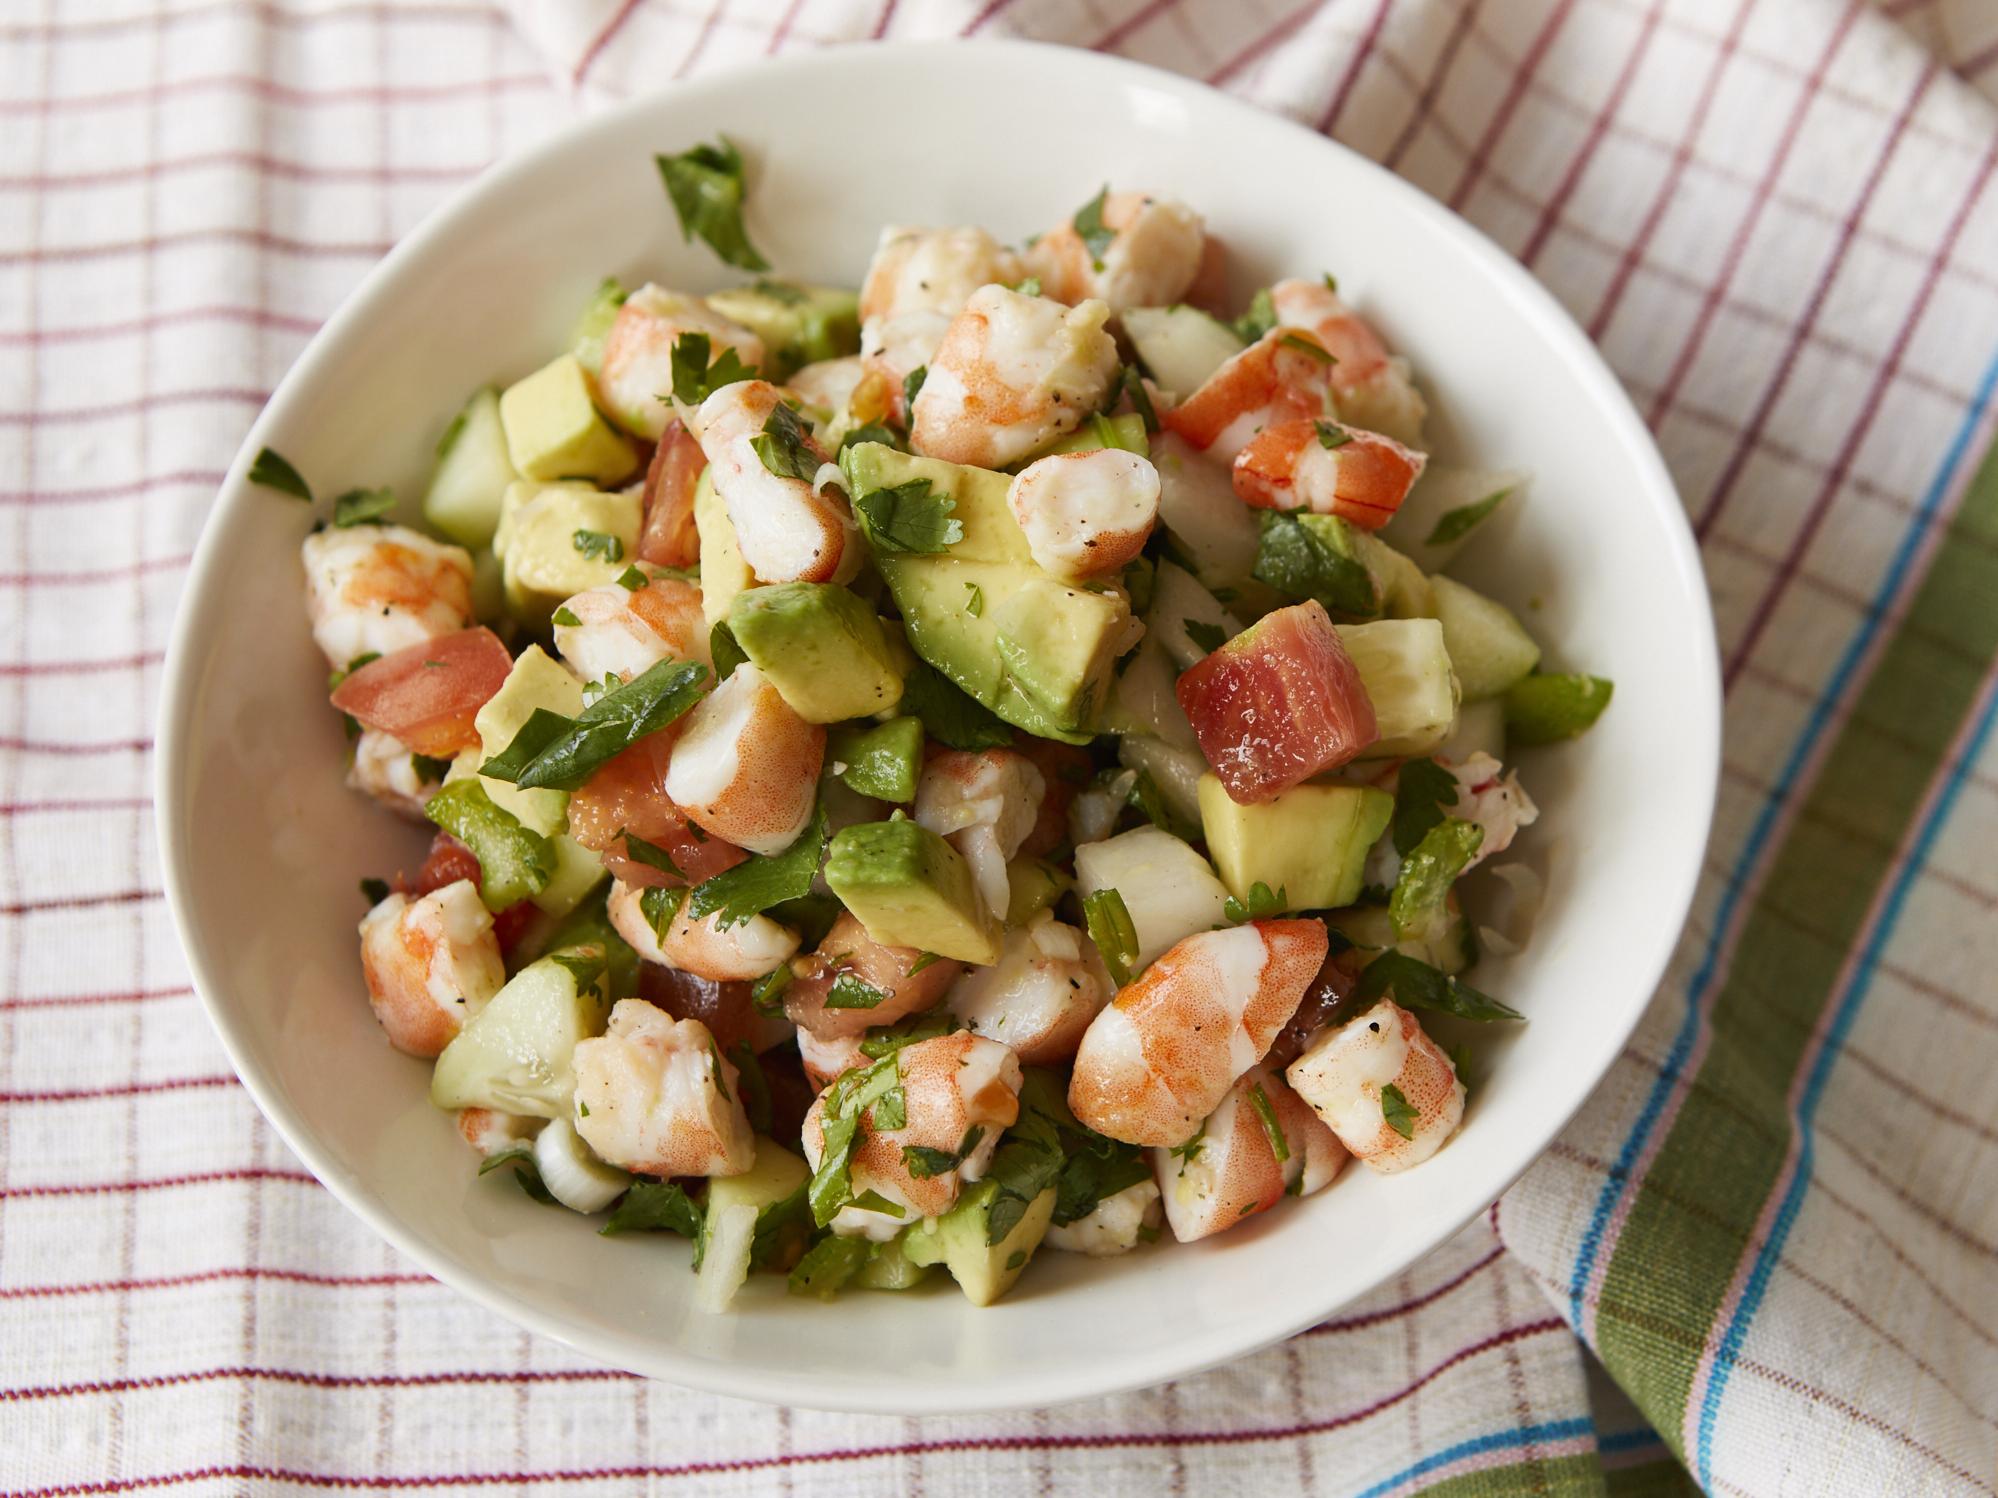  A refreshing and healthy seafood option